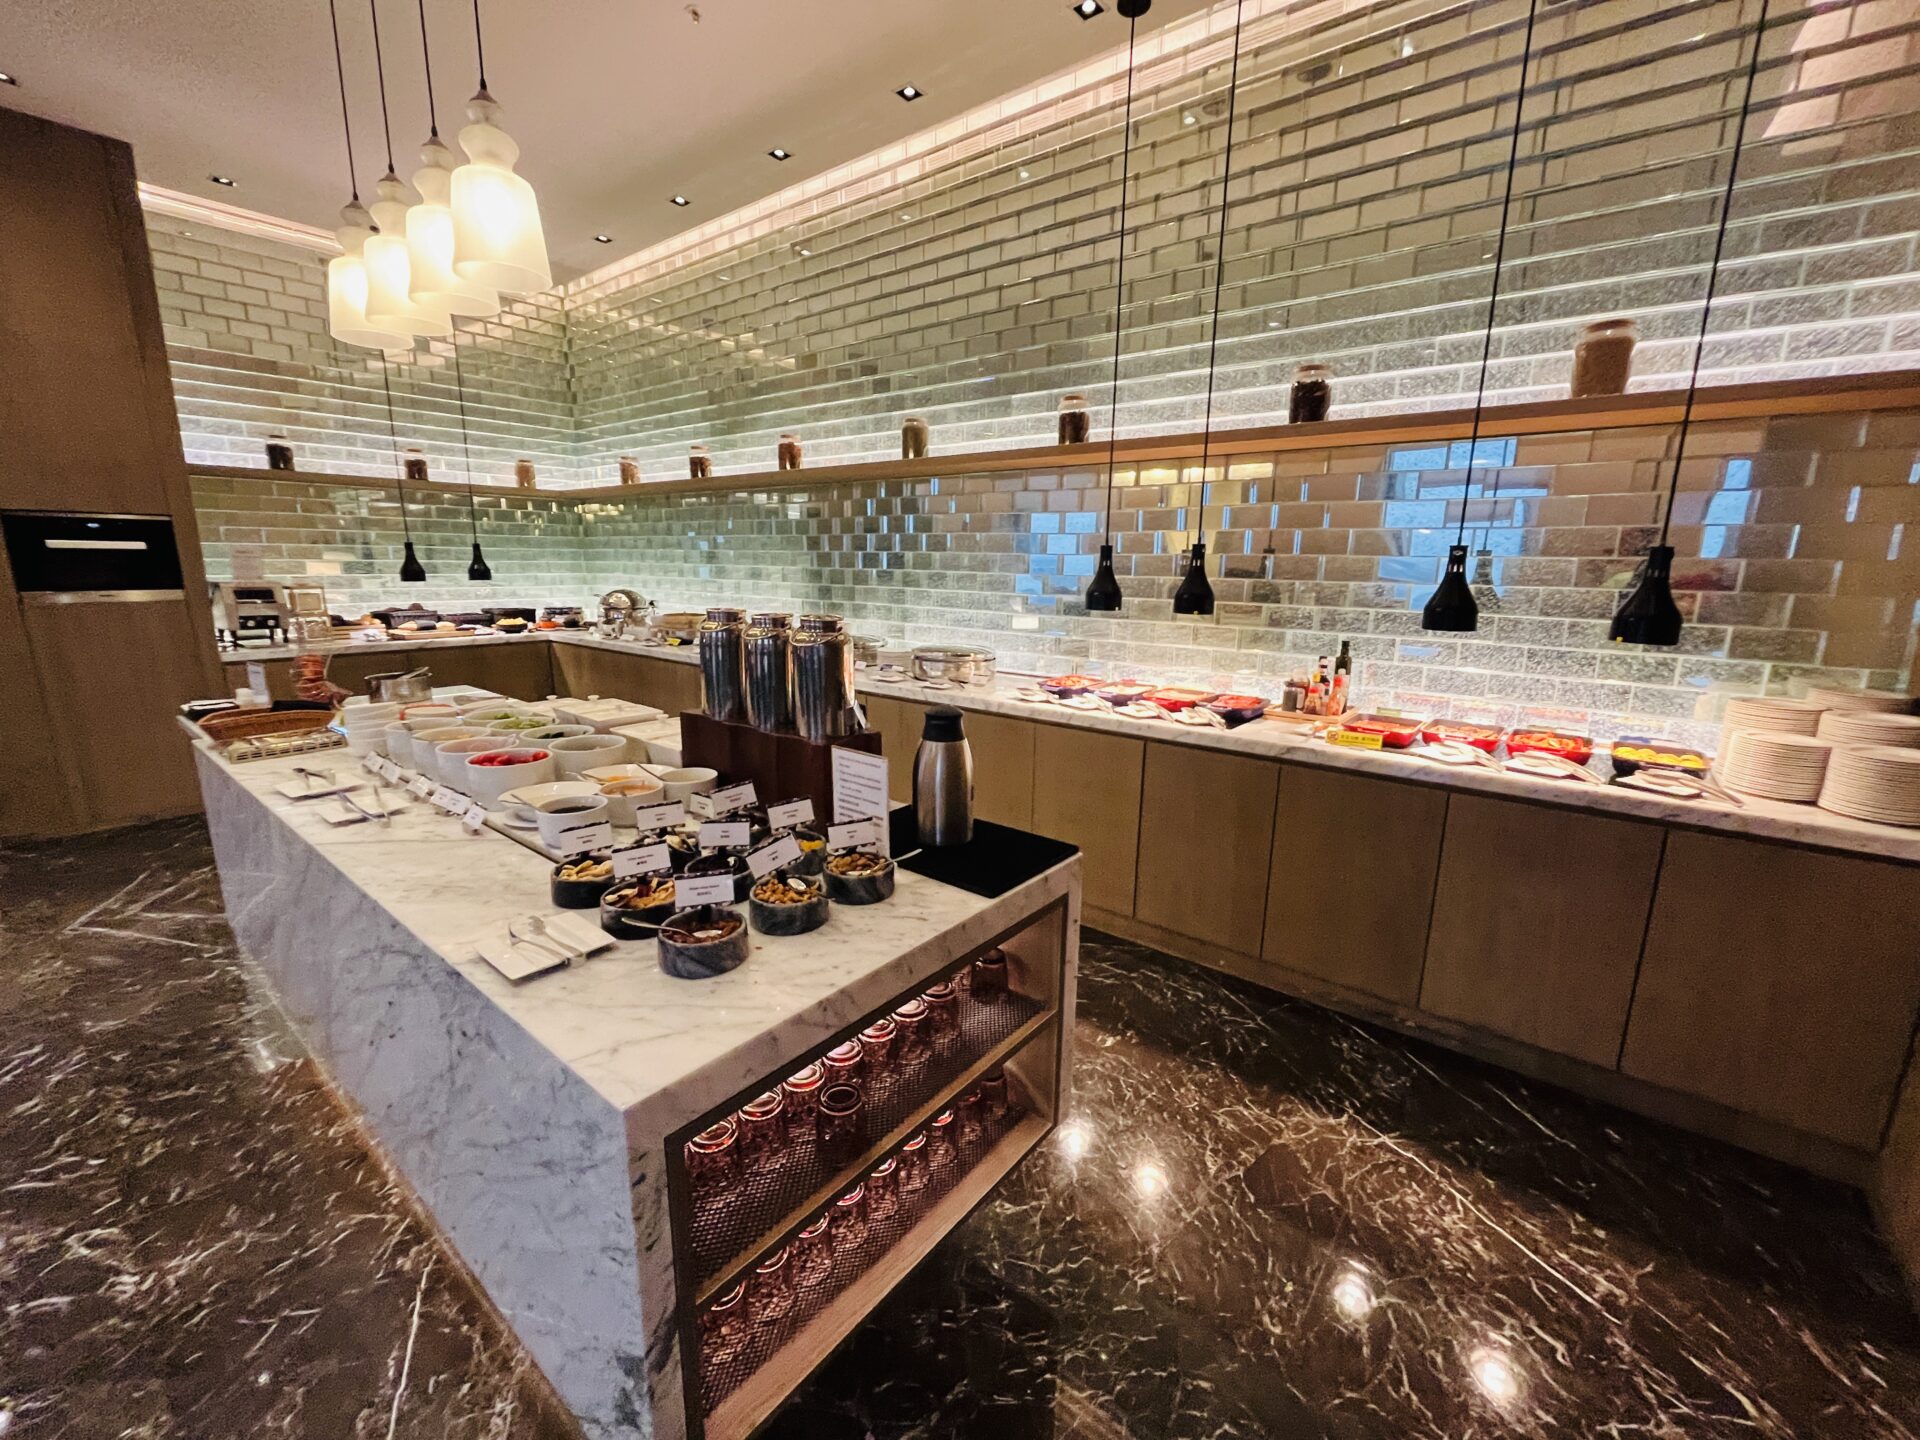 Review Executive Club Lounge at Kaohsiung Marriott Hotel